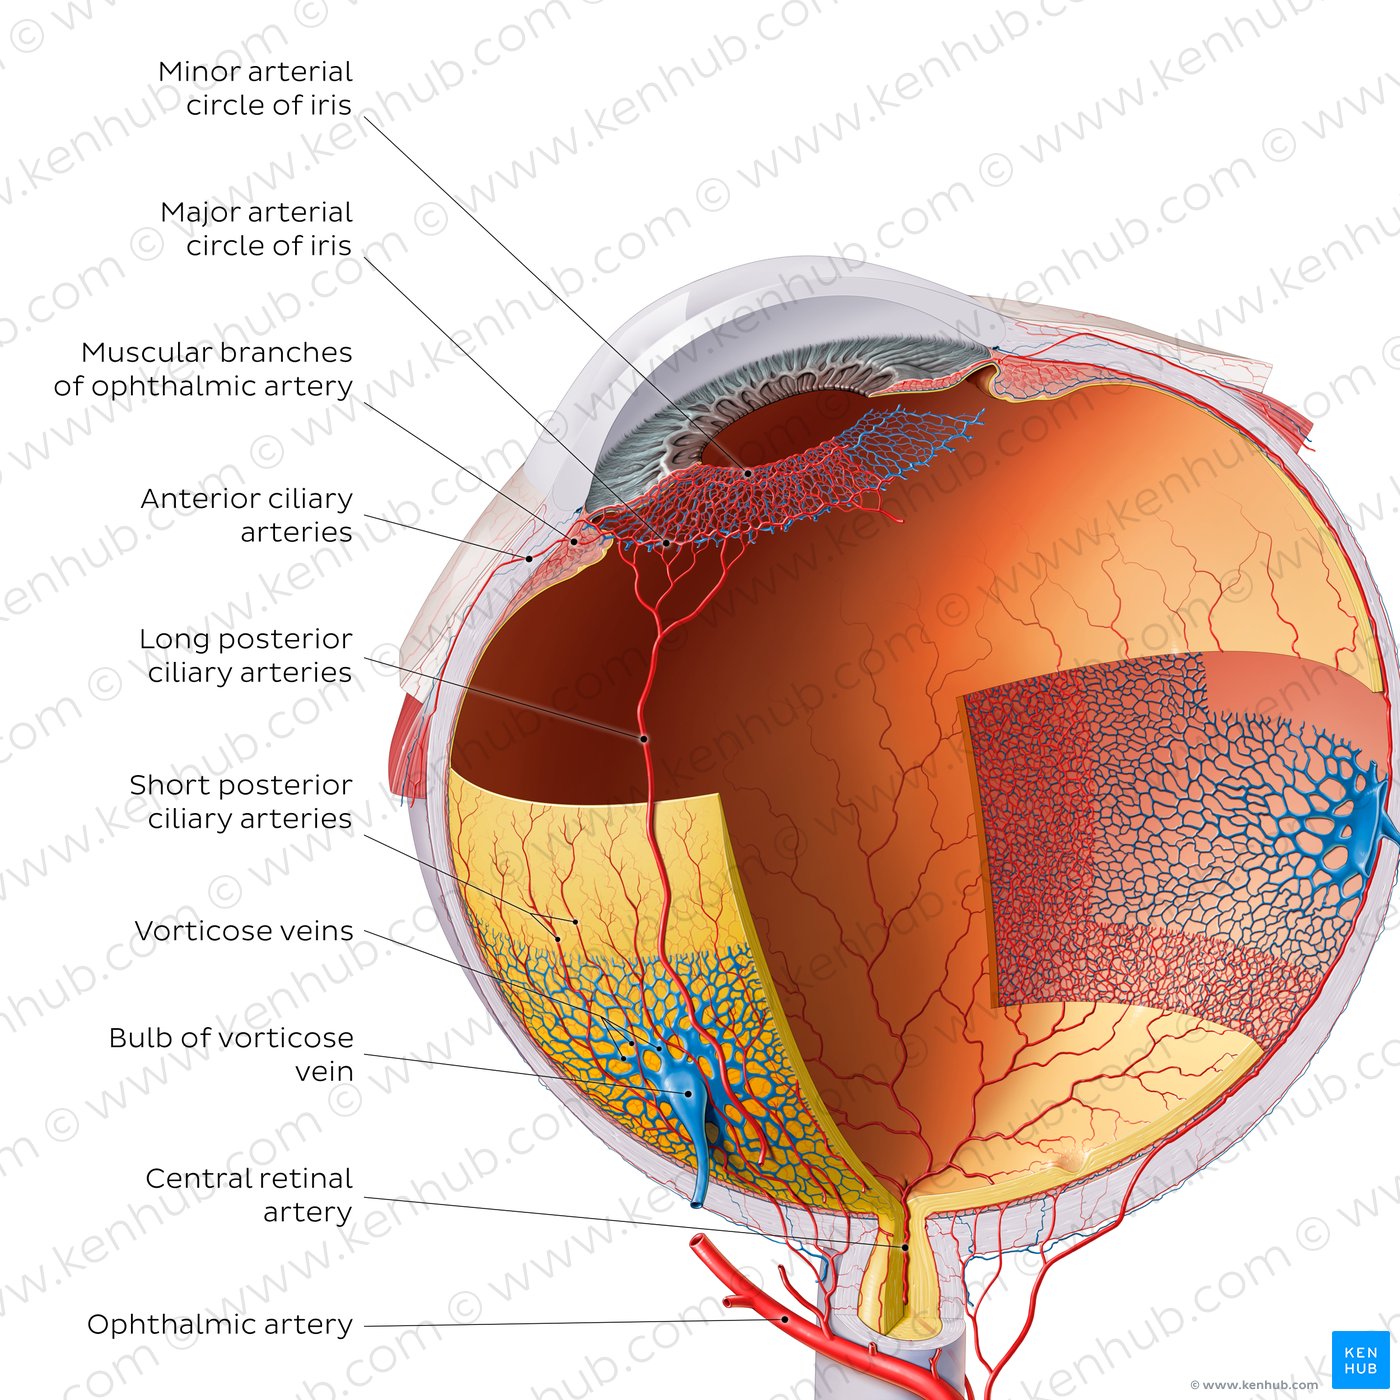 Overview of blood vessels of the eye